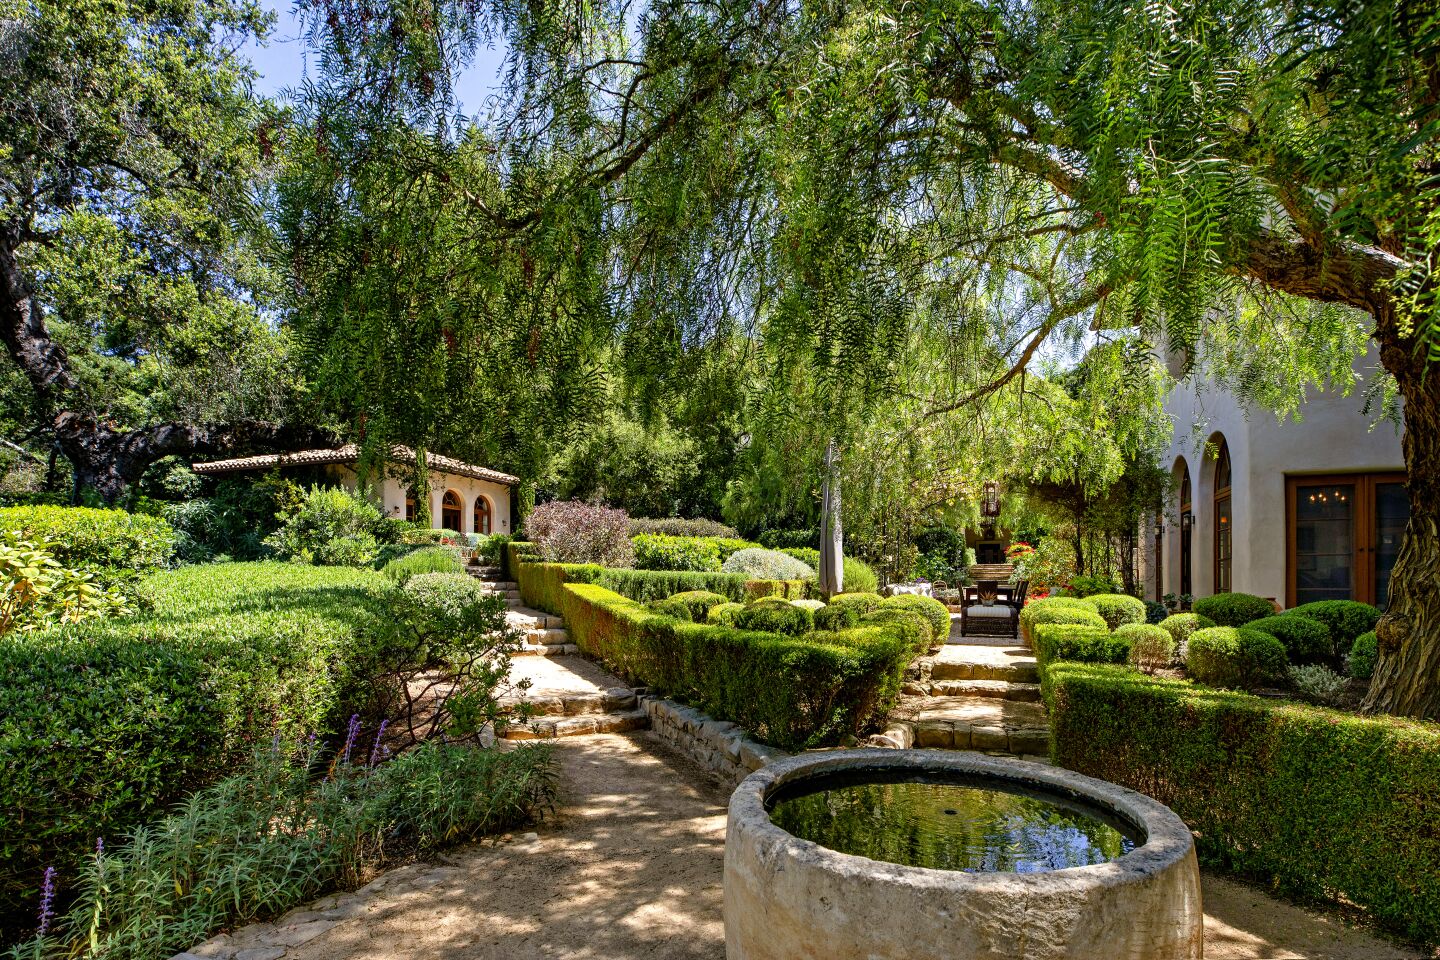 A stone fountain and paths lead through the gardens outside the Mediterranean villa-style home